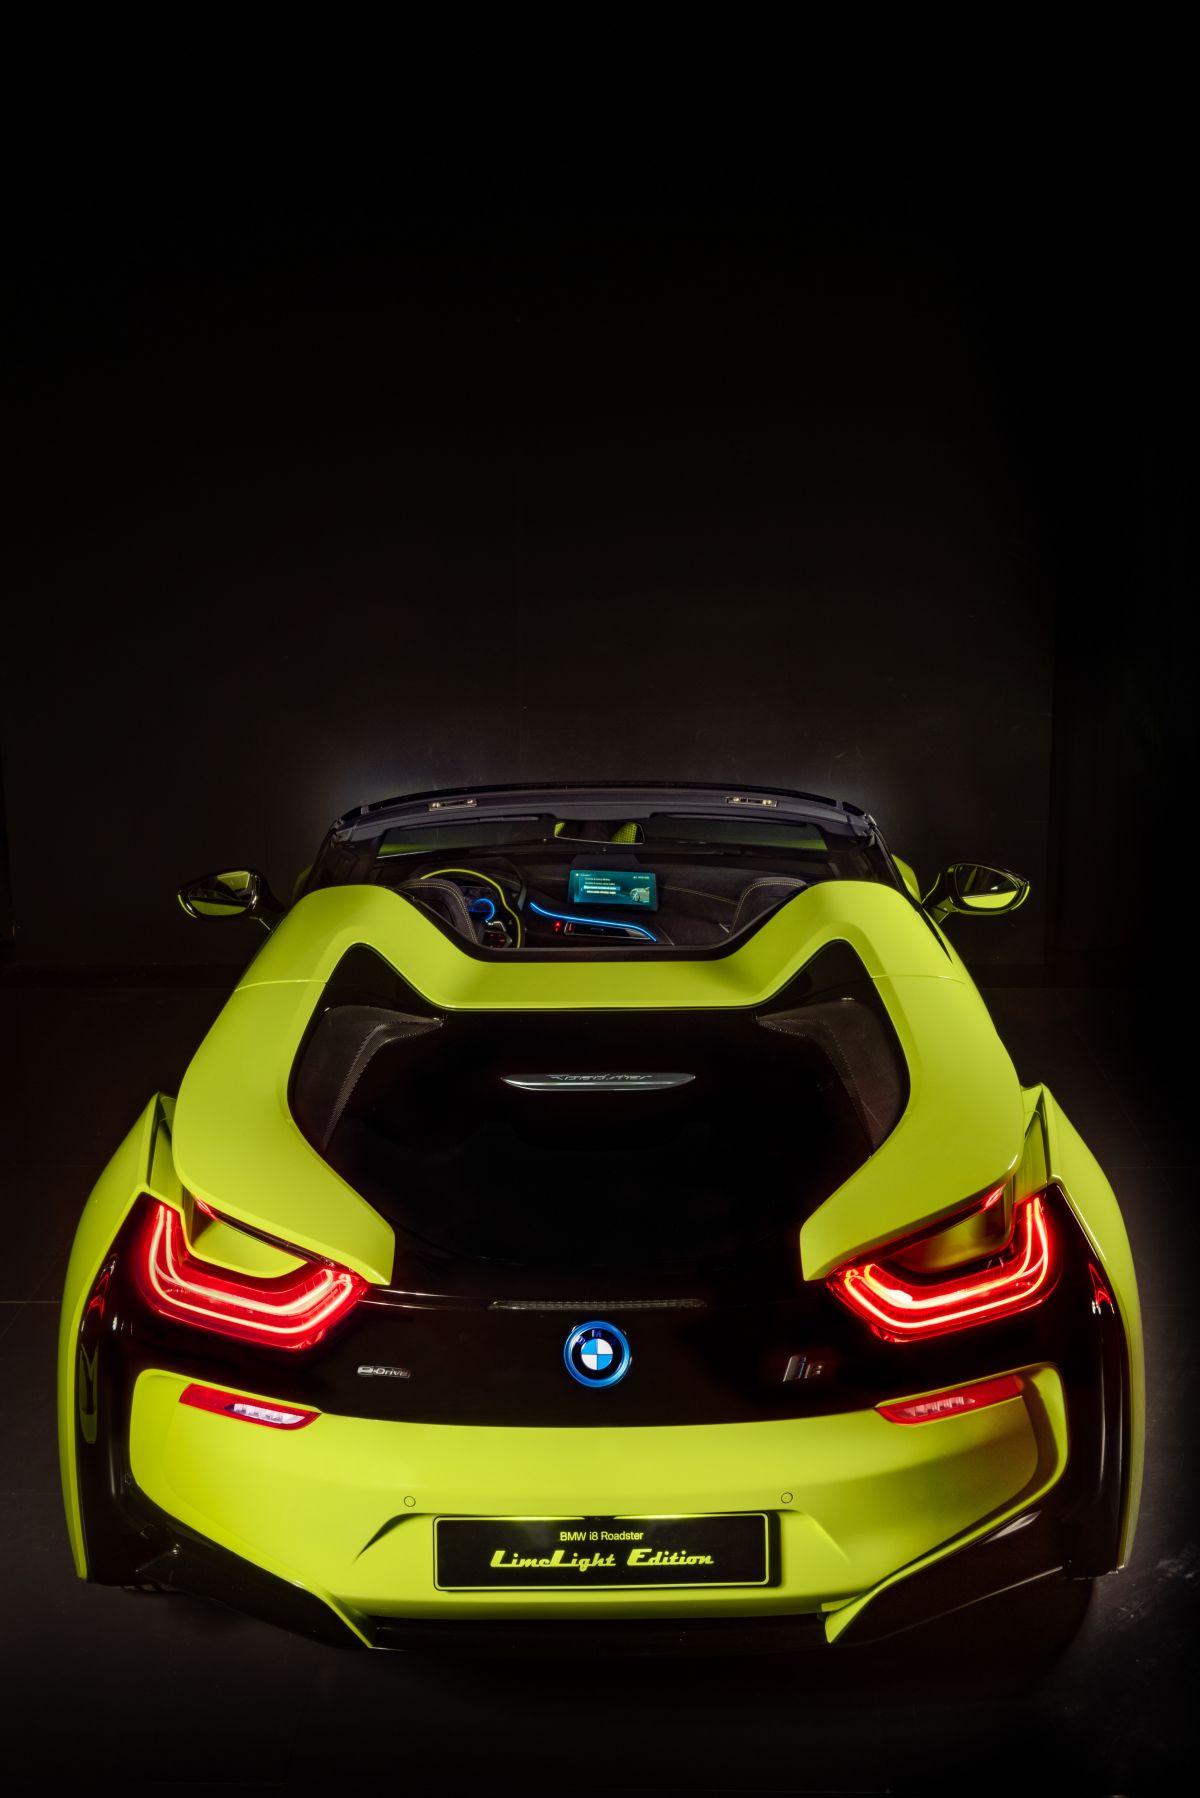 FormaCar: Alcantara launches the BMW i8 Roadster LimeLight